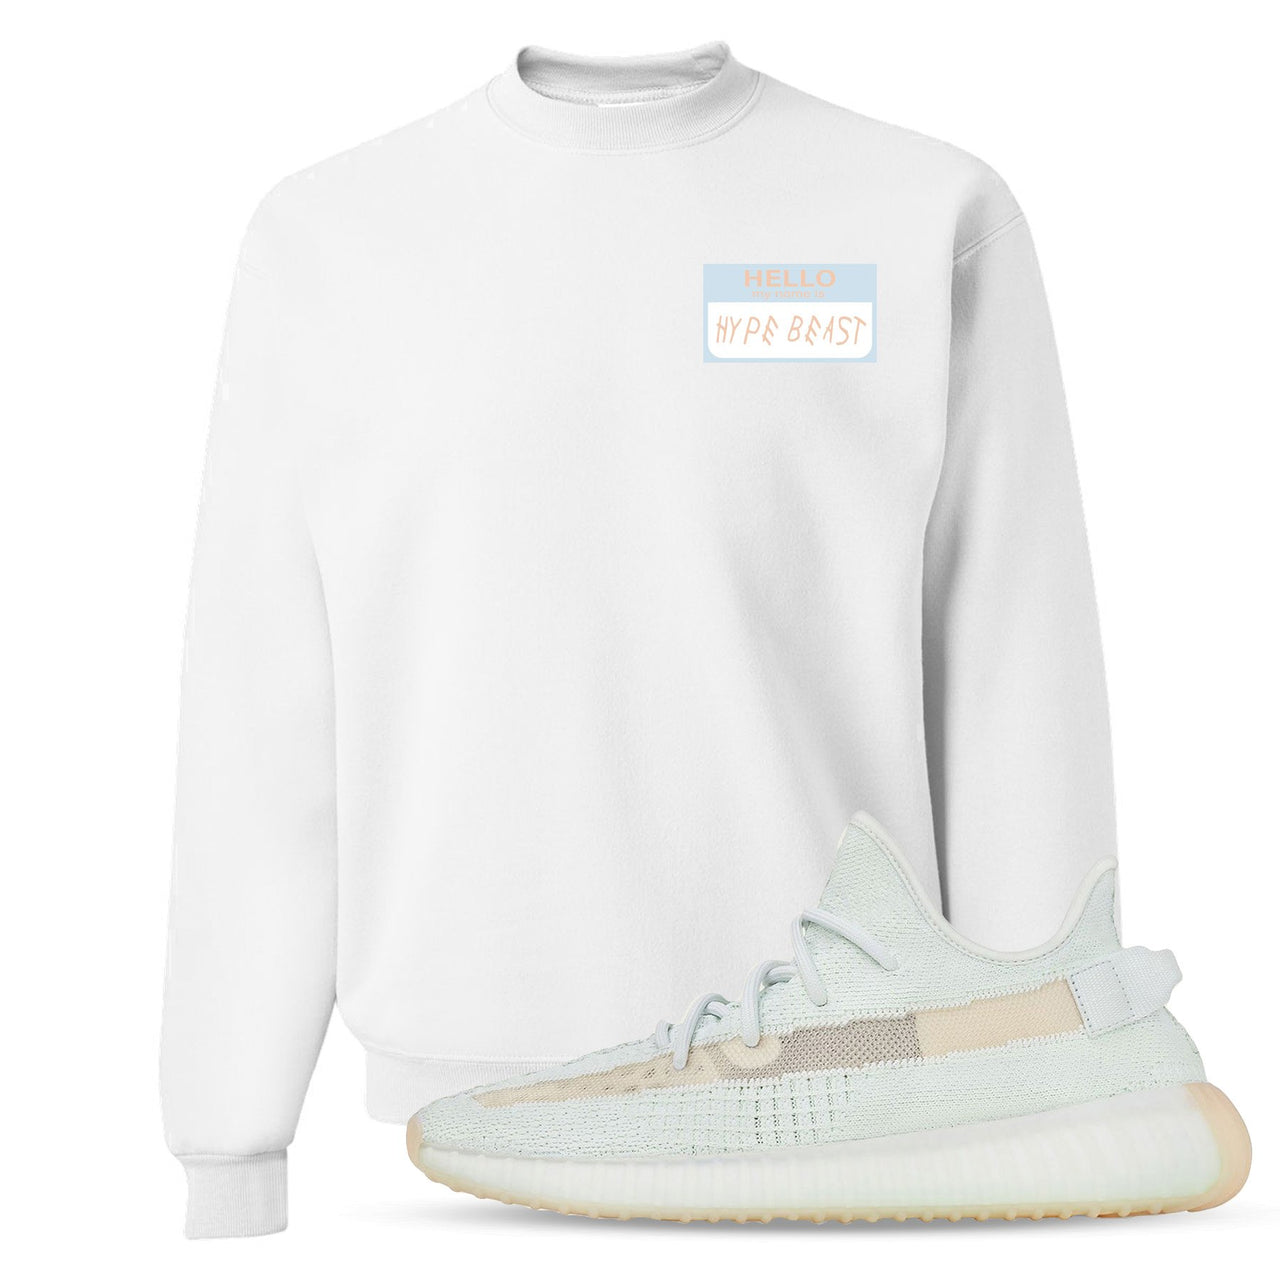 Hyperspace 350s Crewneck Sweater | Hello My Name Is Hype Beast Woe, White